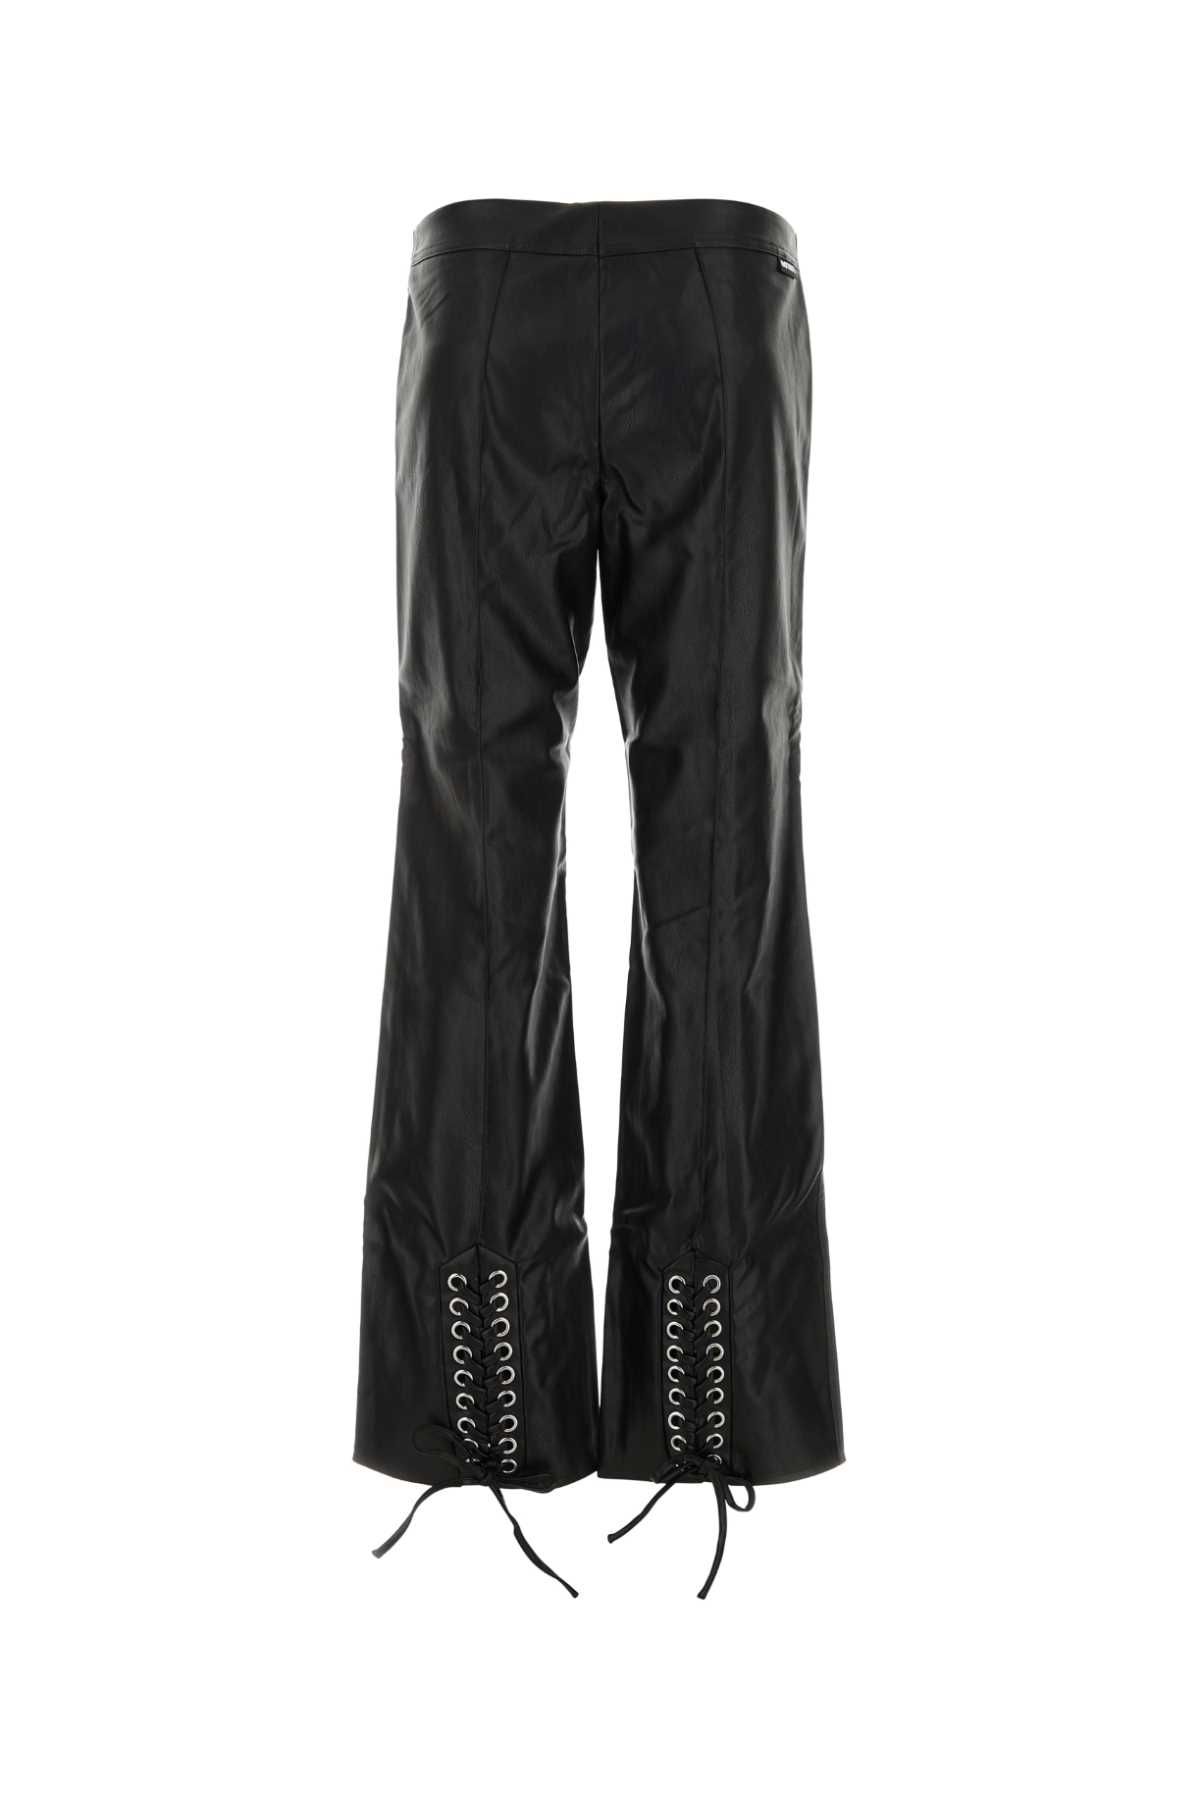 Rotate Birger Christensen Black Synthetic Leather Pant